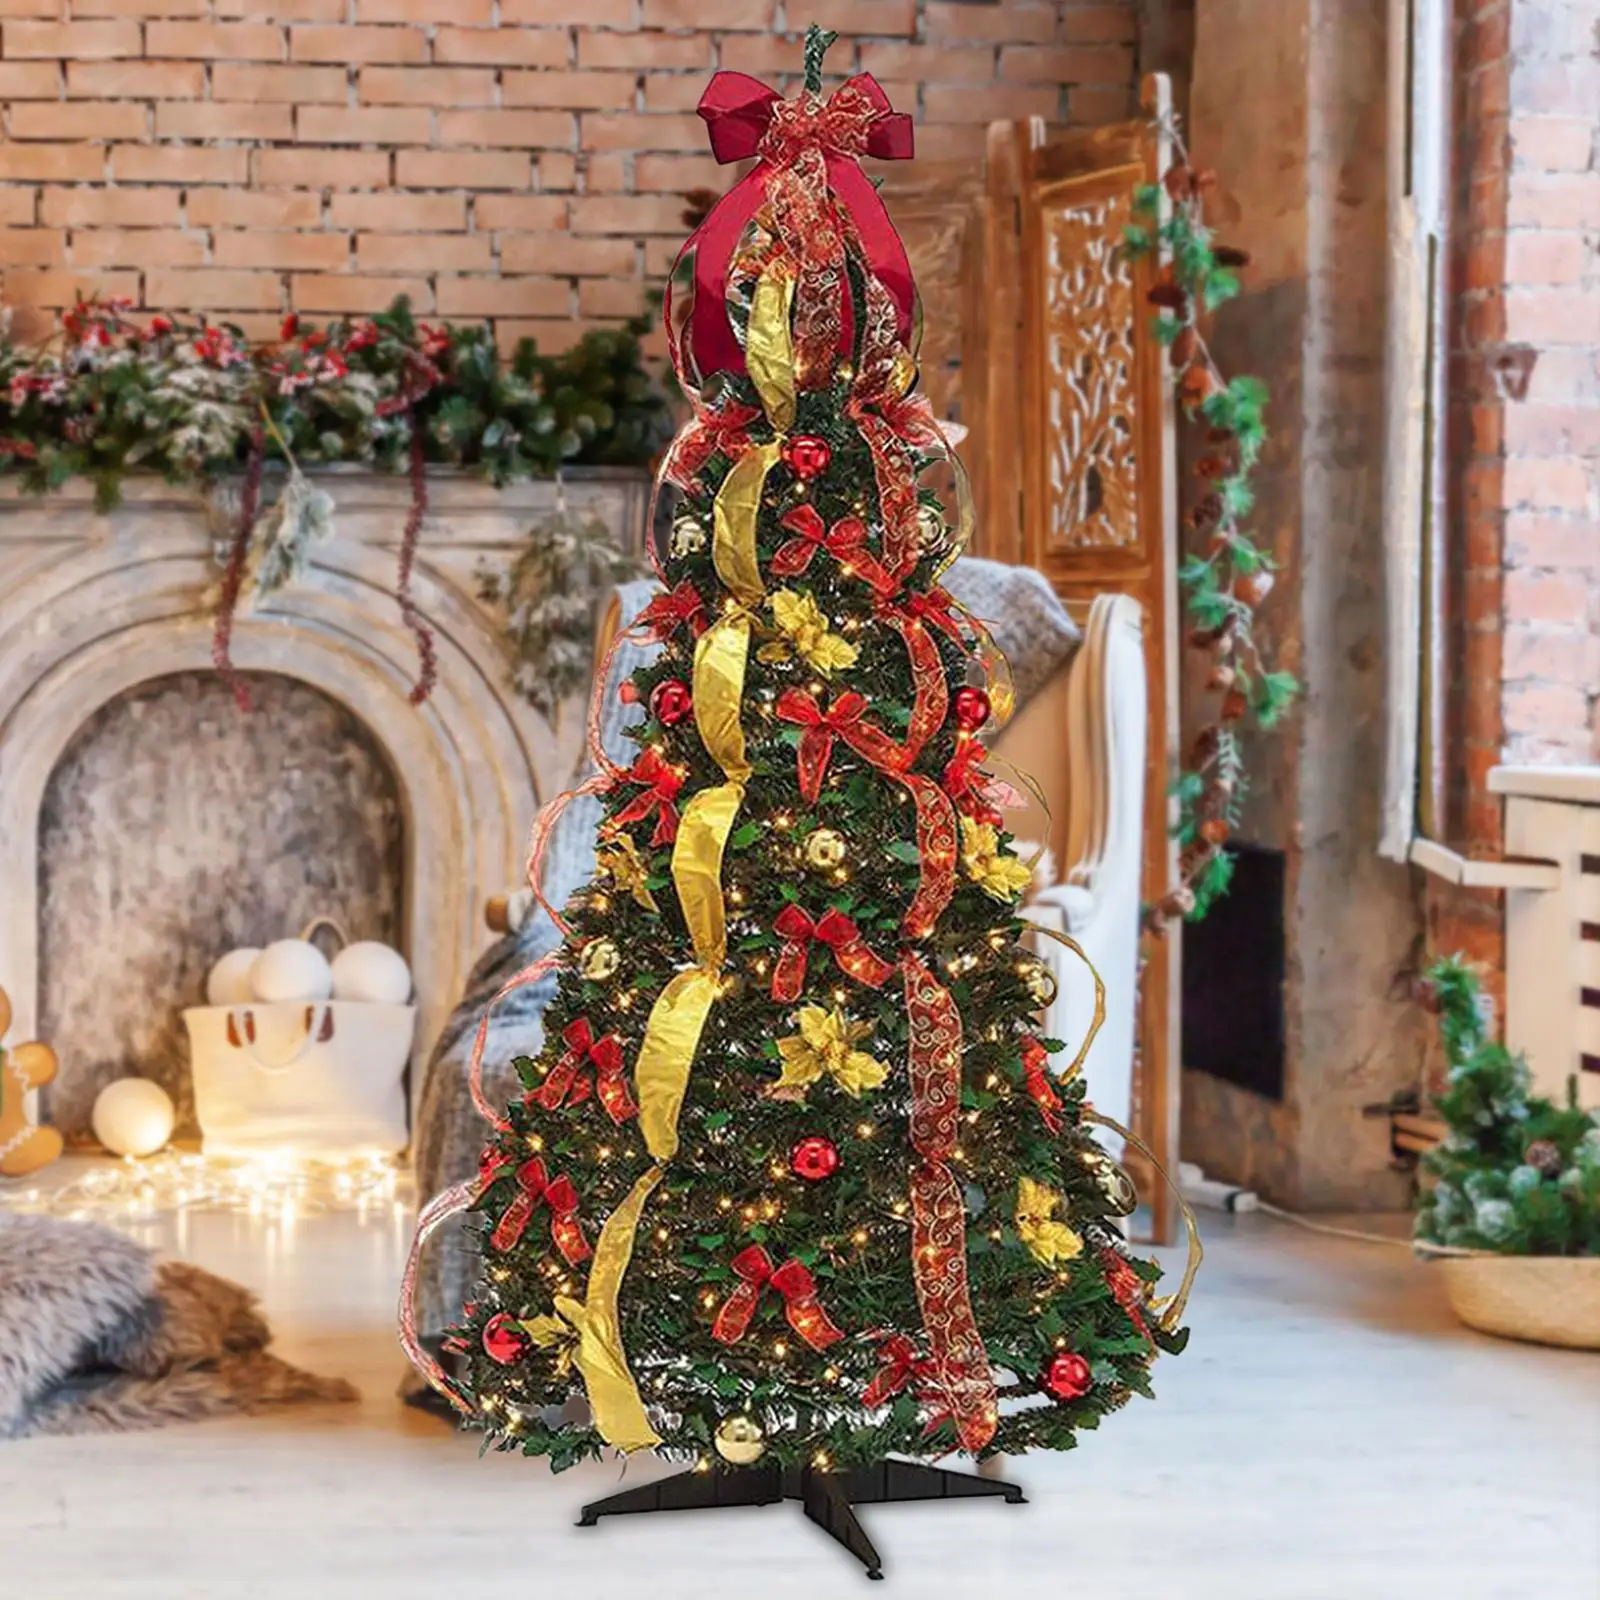 Foldable Christmas Tree 6 ft Easy Assembly Ornaments with Lights Lighted Xmas Tree for Office Outdoor Home Indoor Decoration